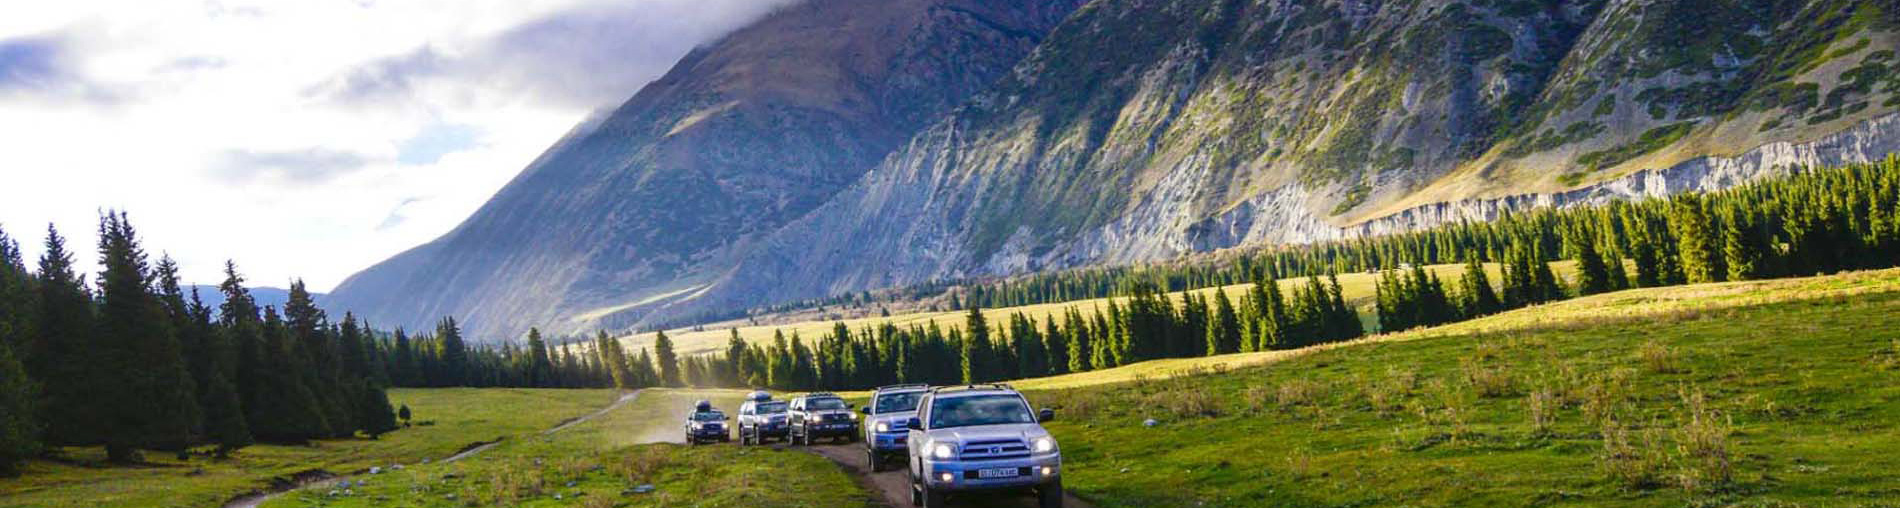 Affordable Holiday Tour Packages to Kyrgyzstan